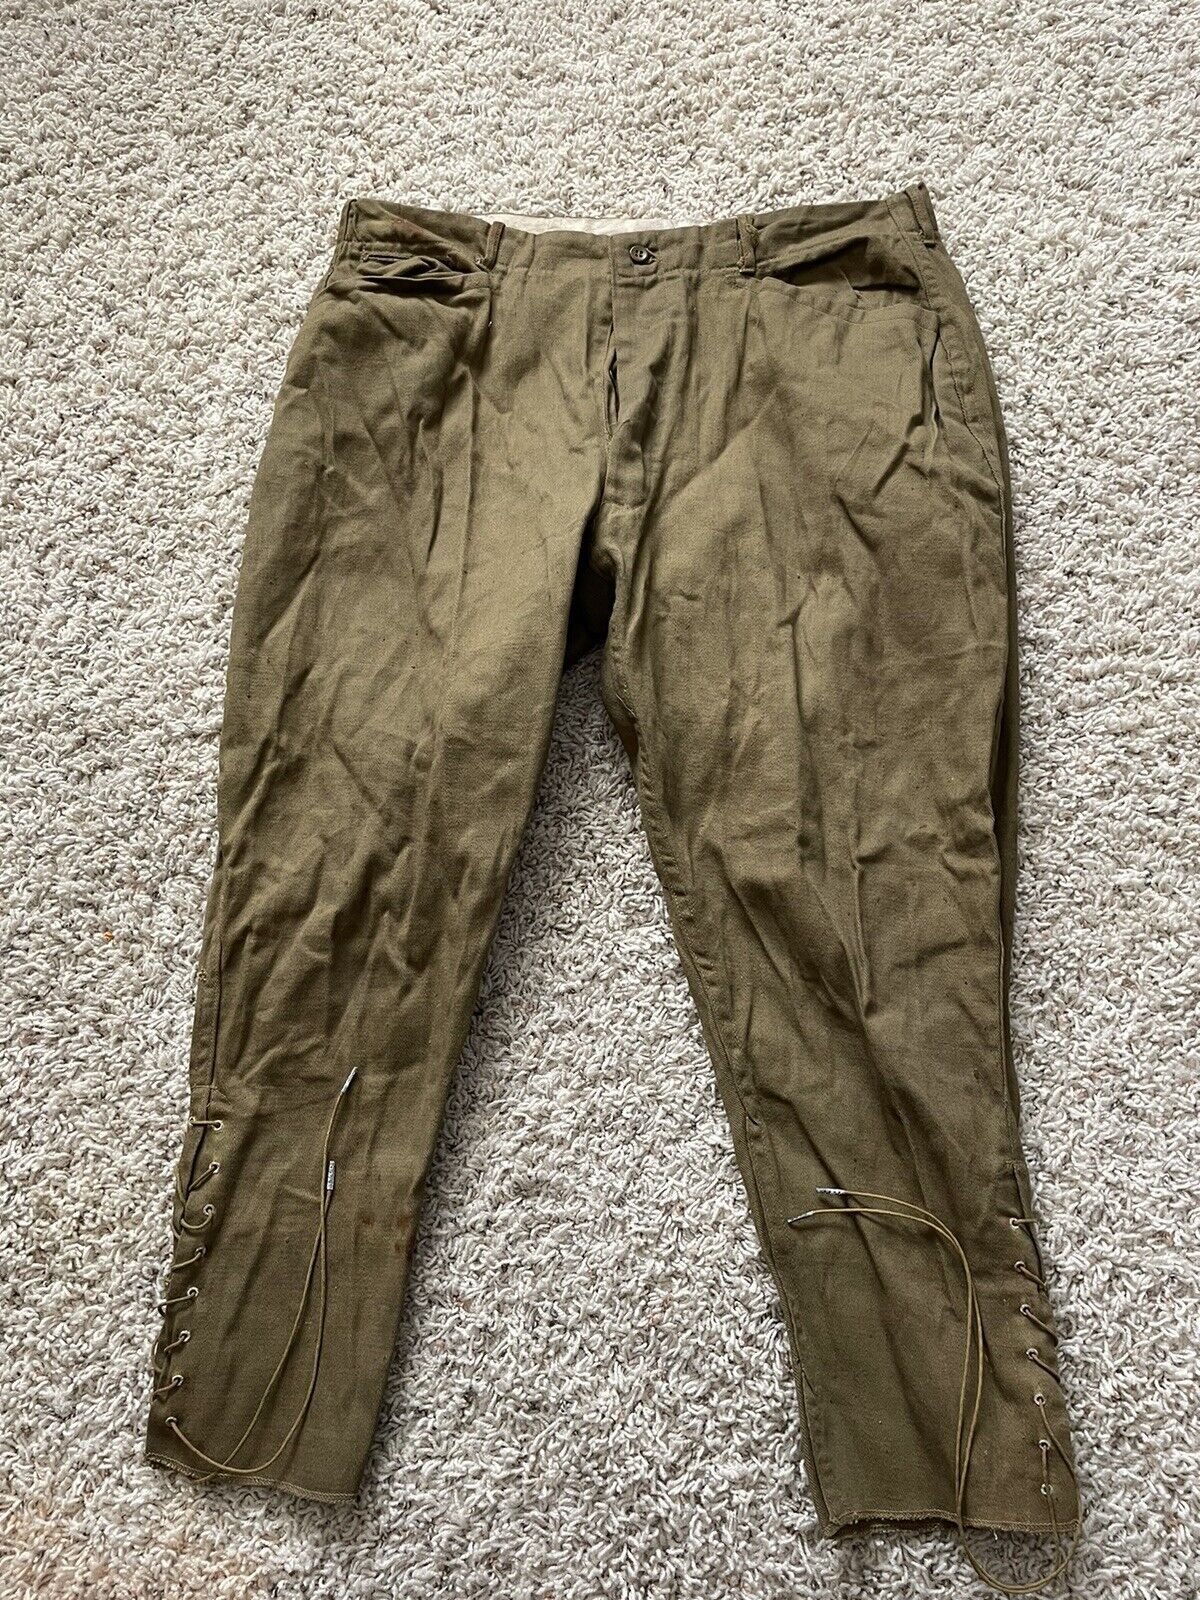 WW1 US Army Wool Pants Trousers Breeches WWI